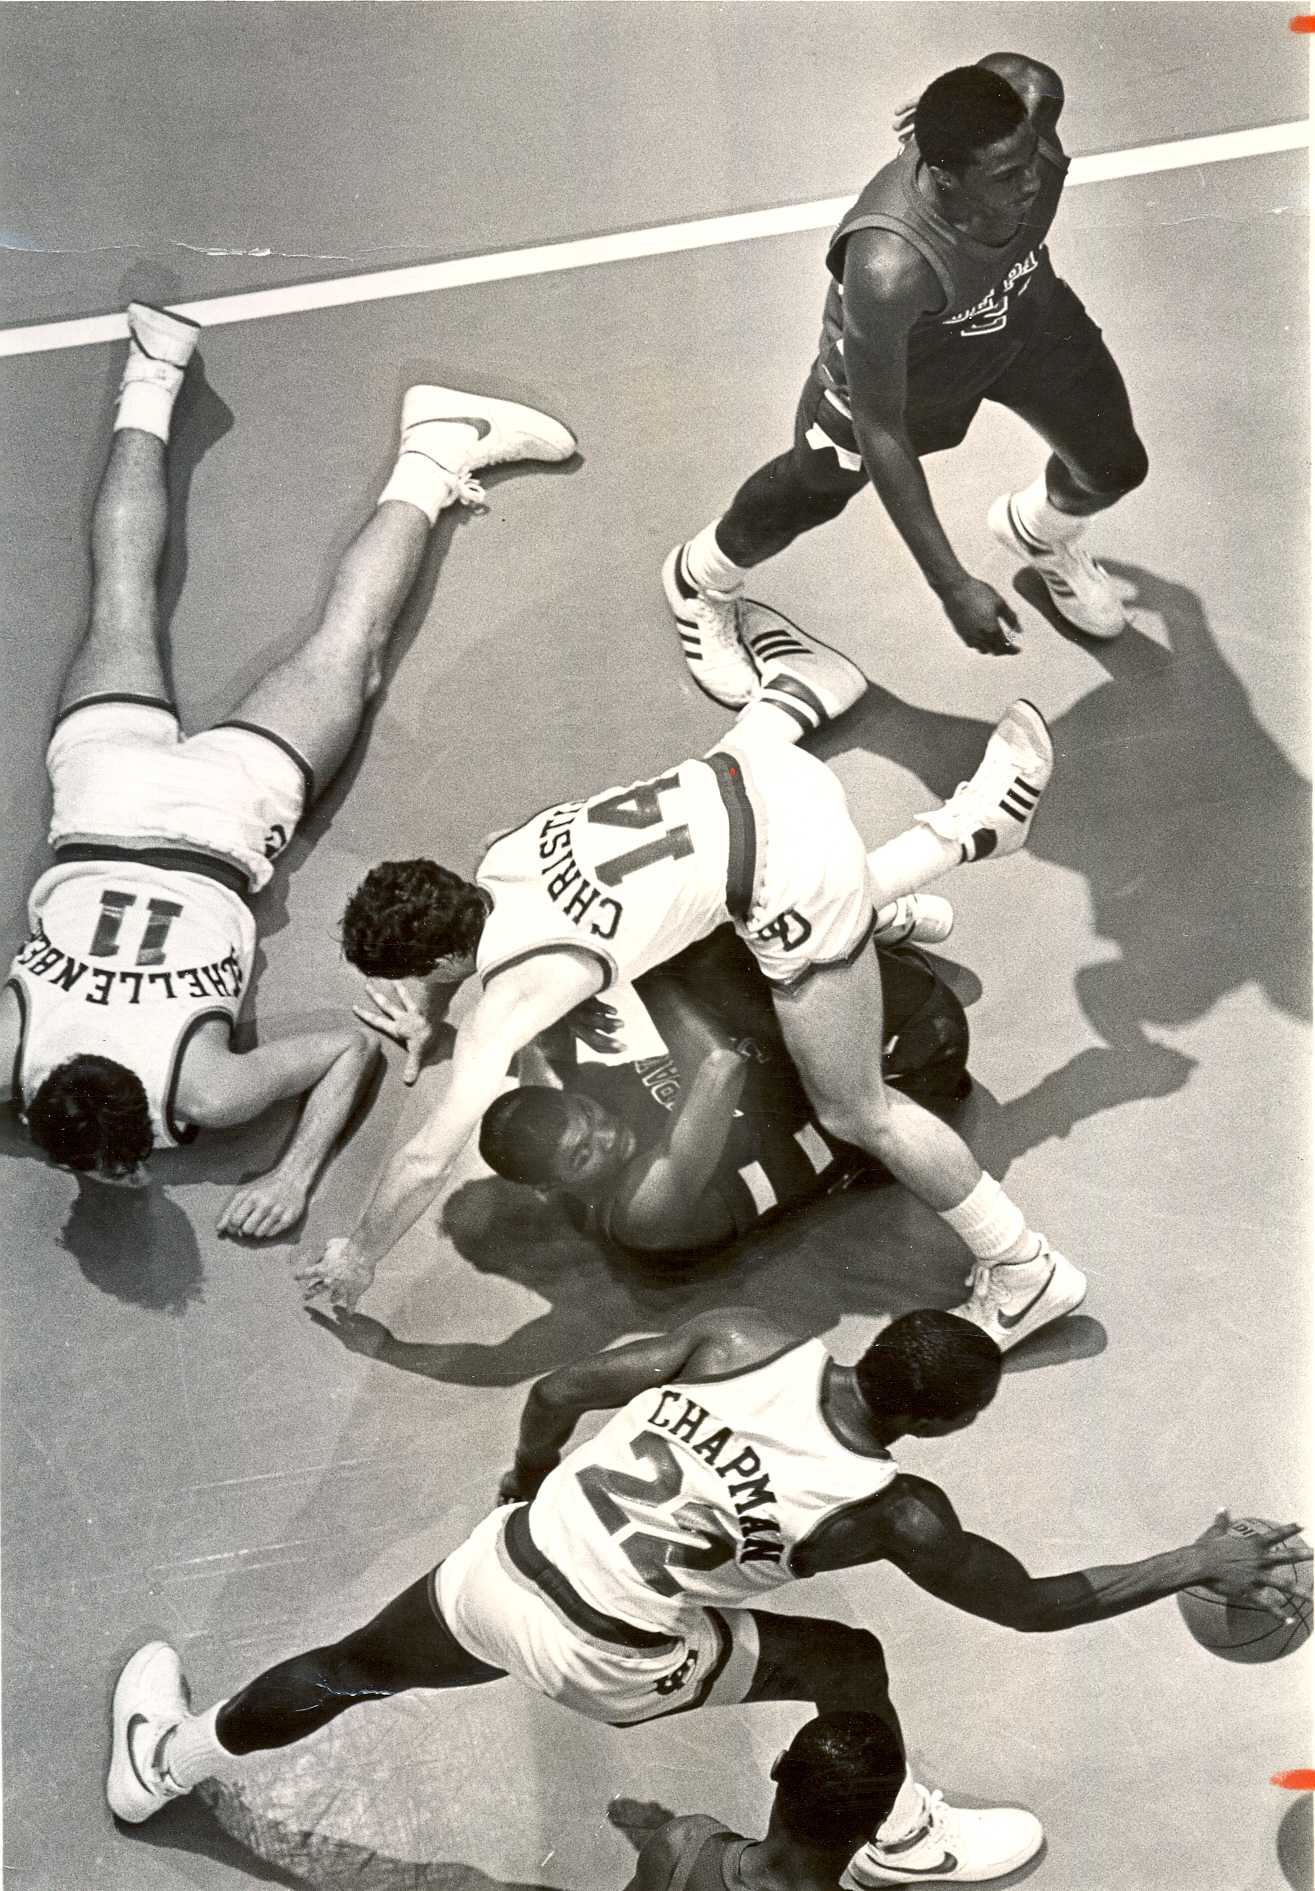 Feb. 24, 1984. UD vs. DePaul. The battle for a loose ball as the game drew to a close found DePaul's Kevin Home, #34, being run over by Dan Christie, while Larry Schellenberger lay sprawled on the floor and Roosevelt Chapman, bottom, comes up with the ball...at the top right is DePaul's Tony Jackson. 